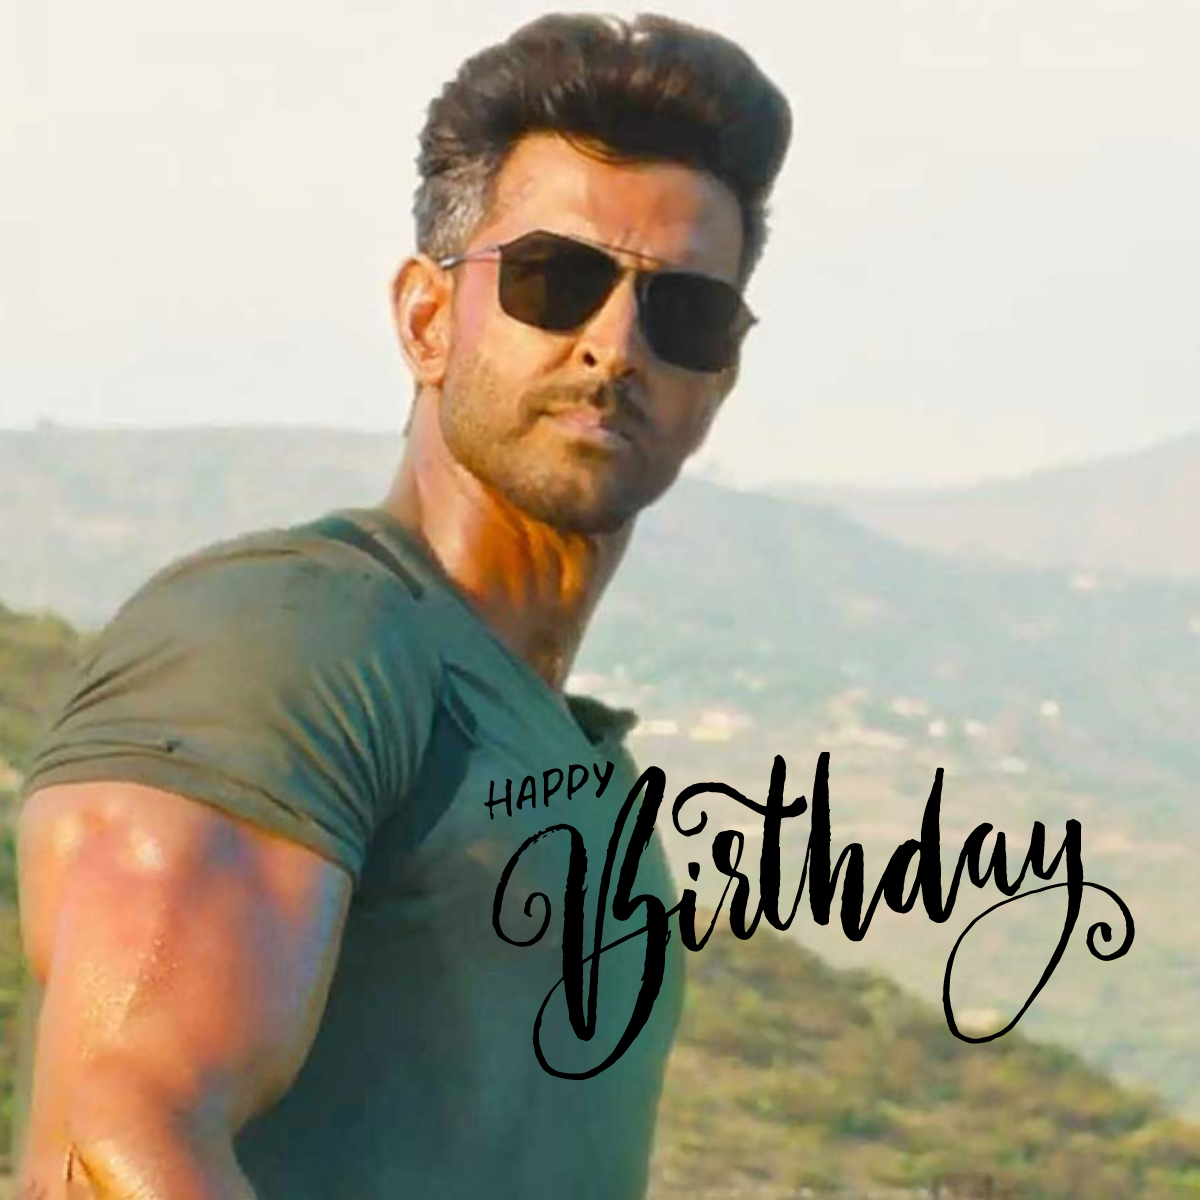 Happy Birthday Hrithik Roshan: Best Wishes, Images, Messages, Greetings, Quotes, and WhatsApp Status Video to Download